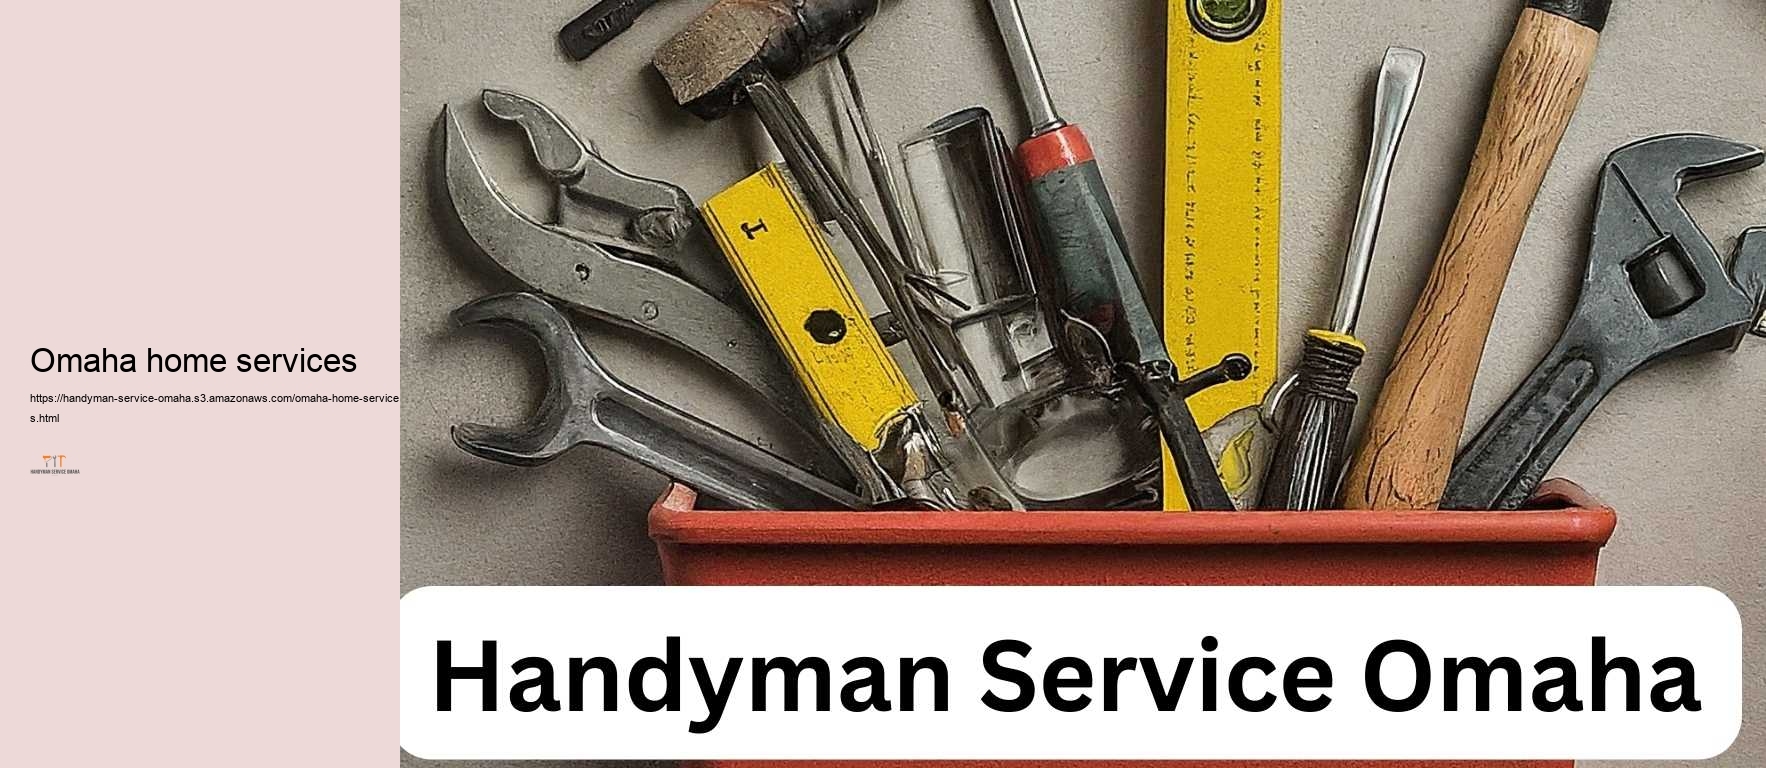 Omaha home services